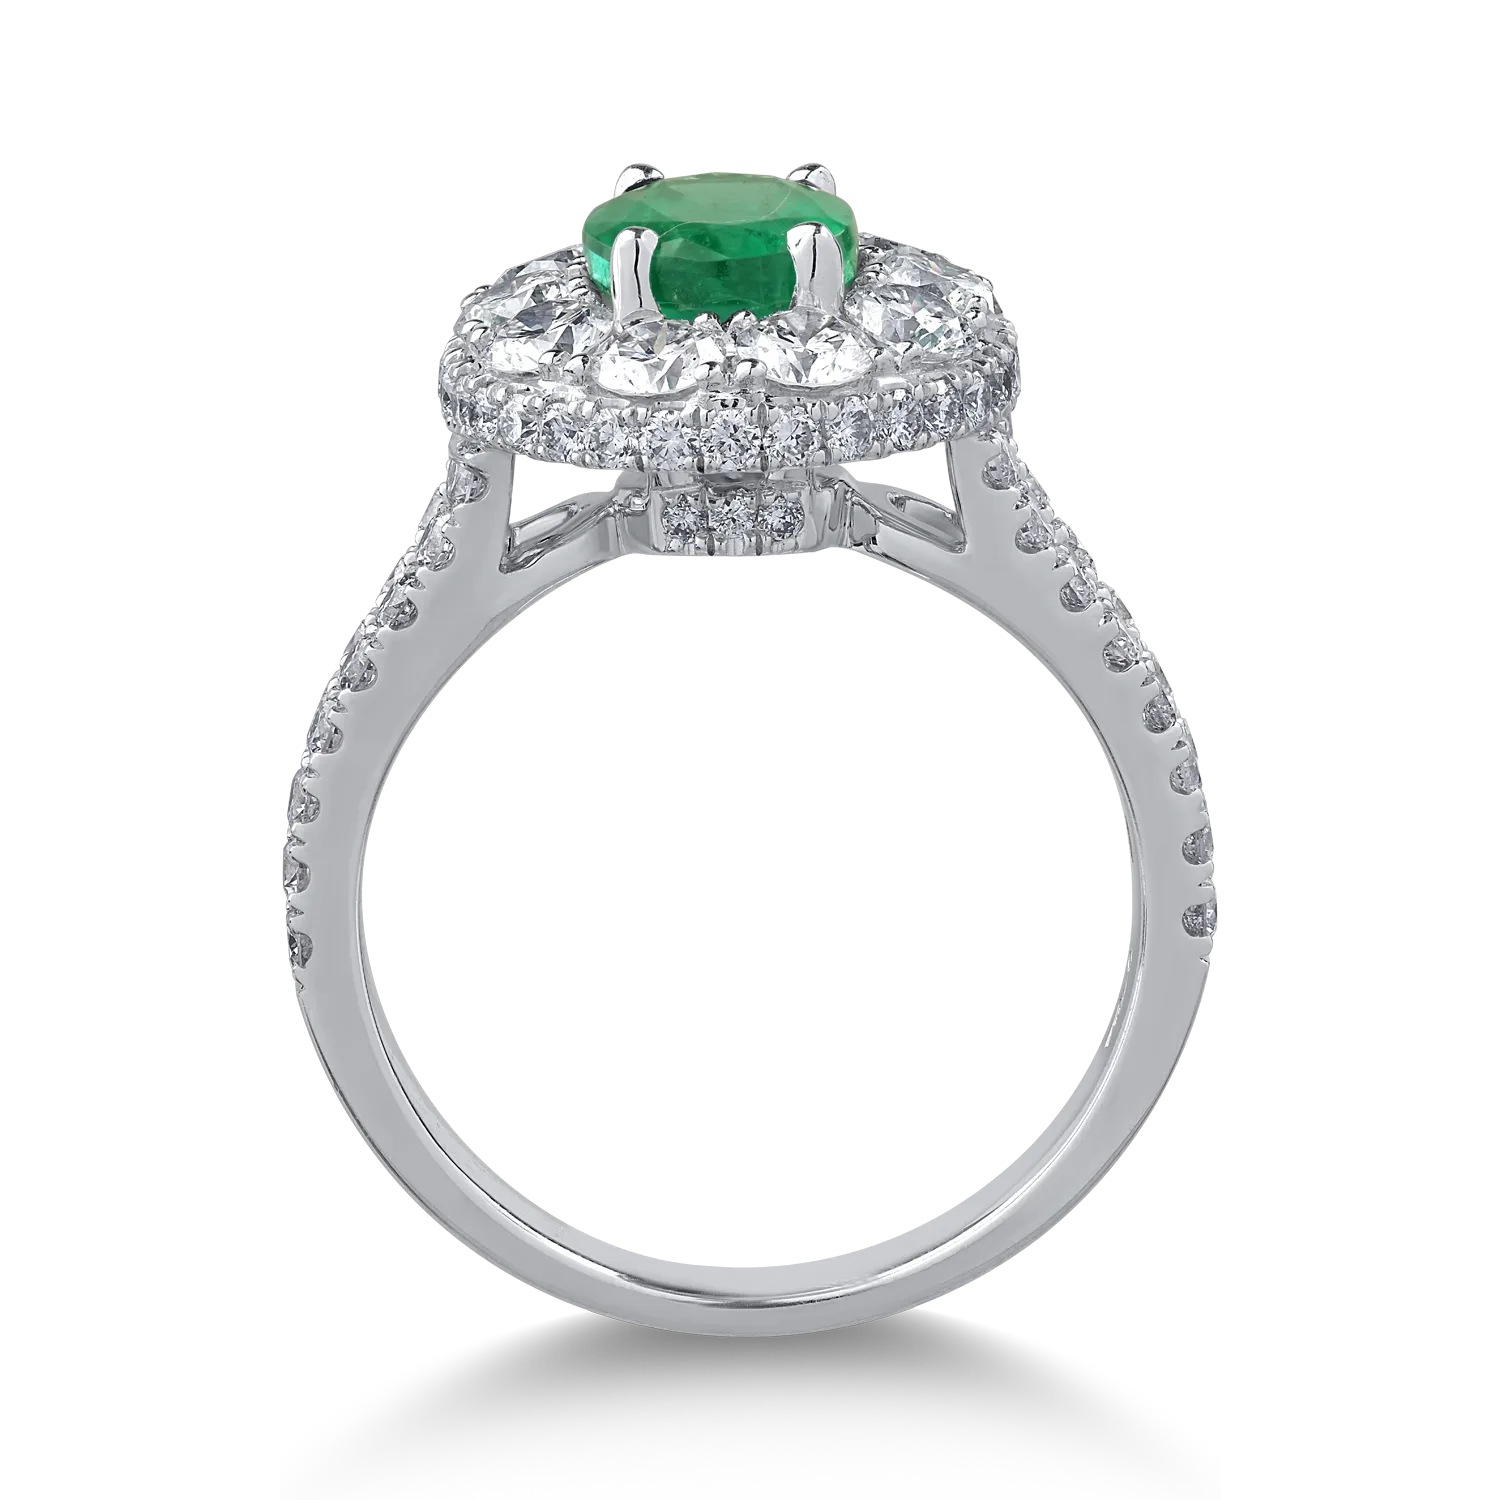 18K white gold ring with 1.31ct emerald and 1.8ct diamonds